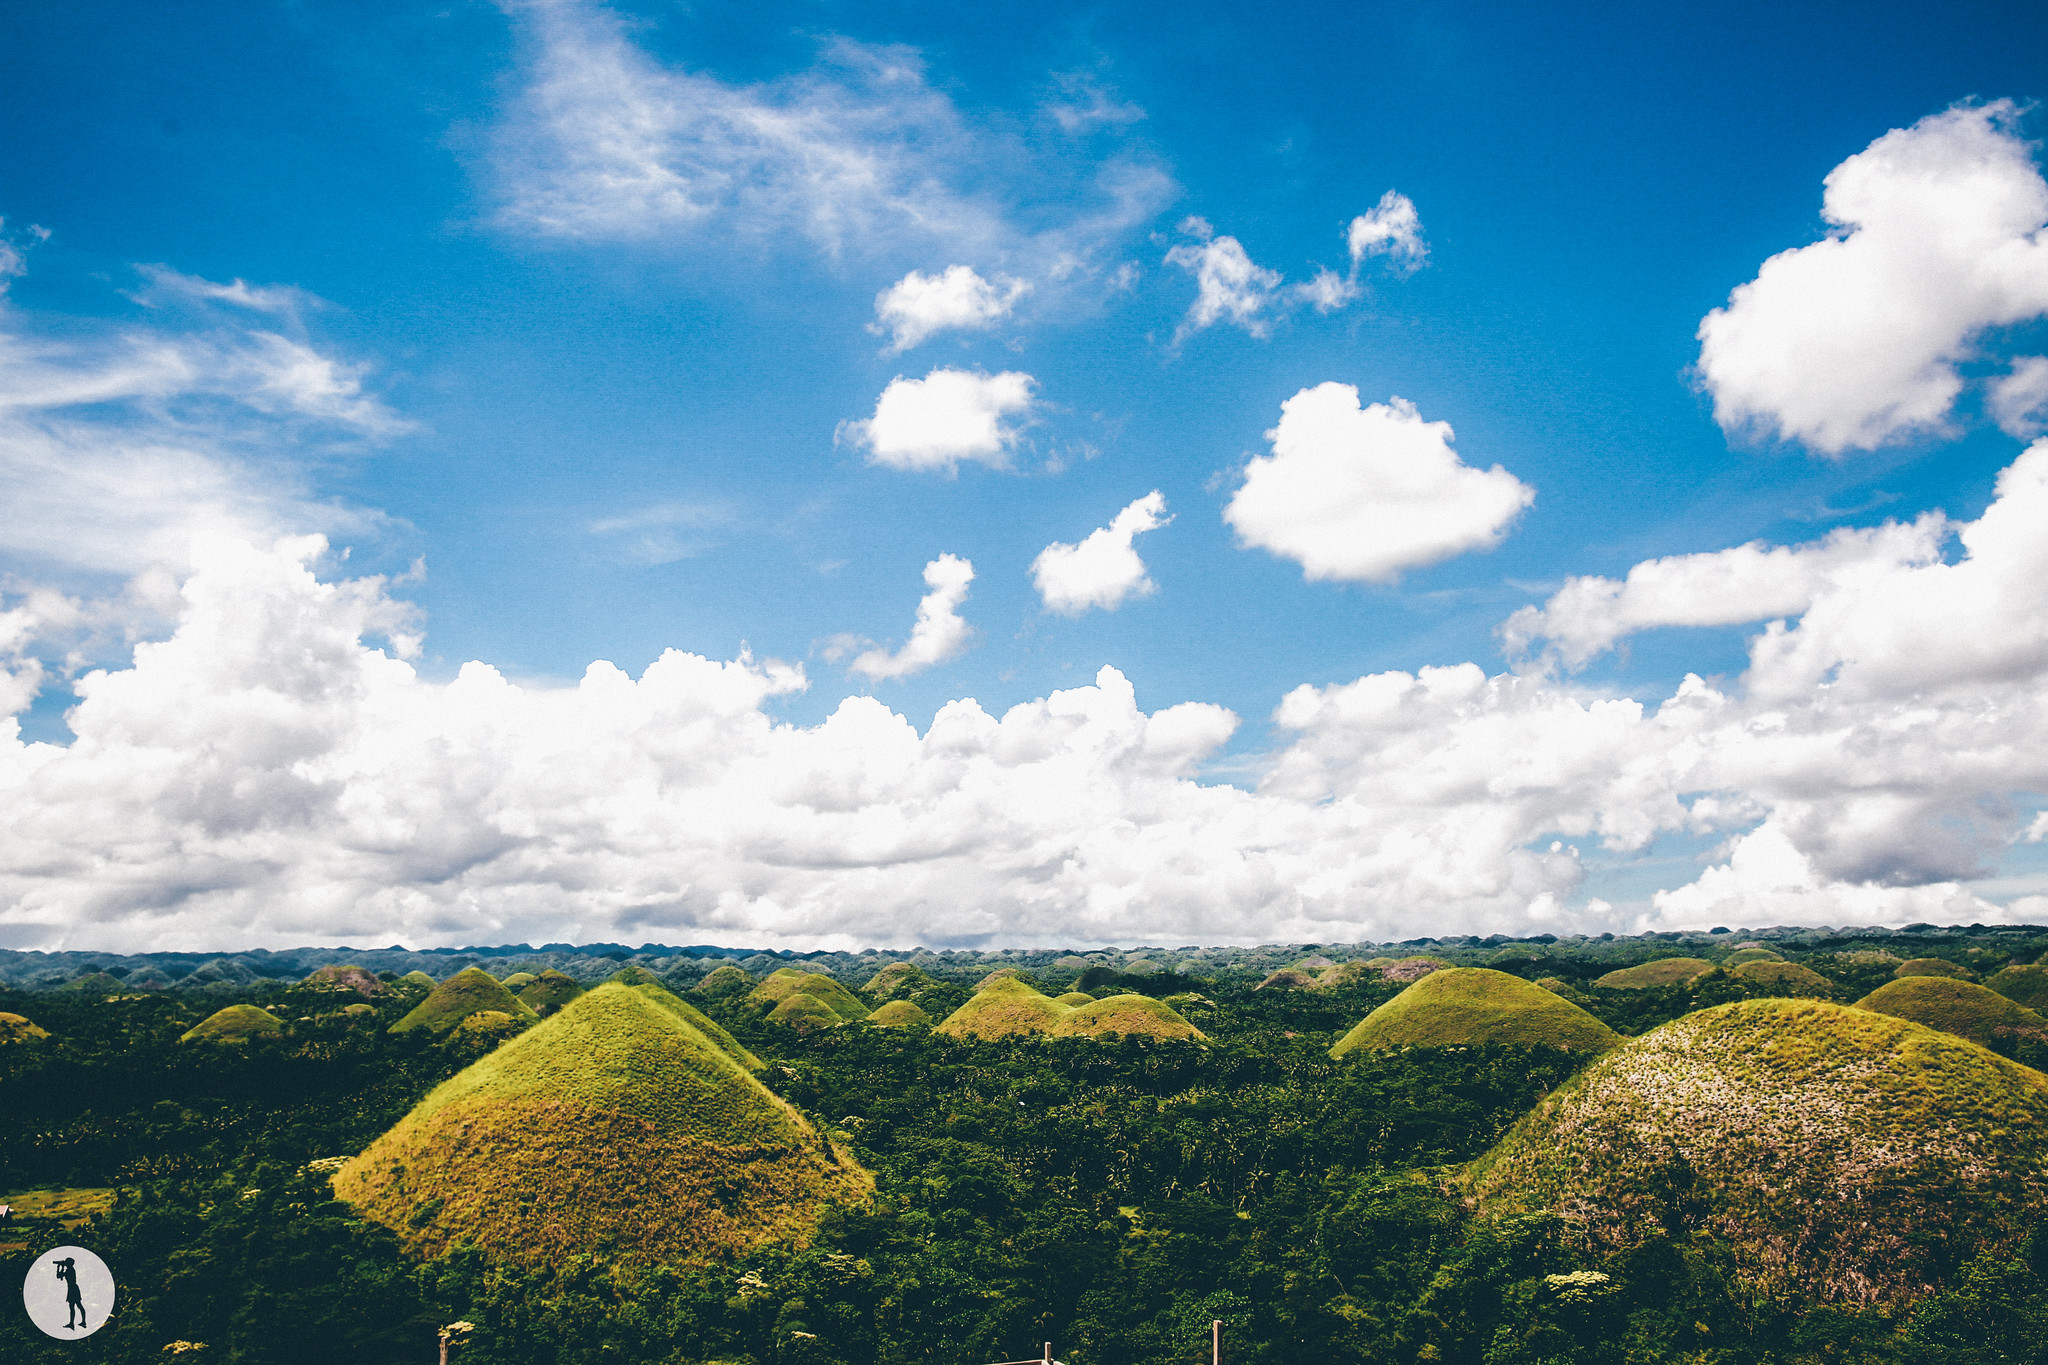 Travel to the Philippines - Bohol